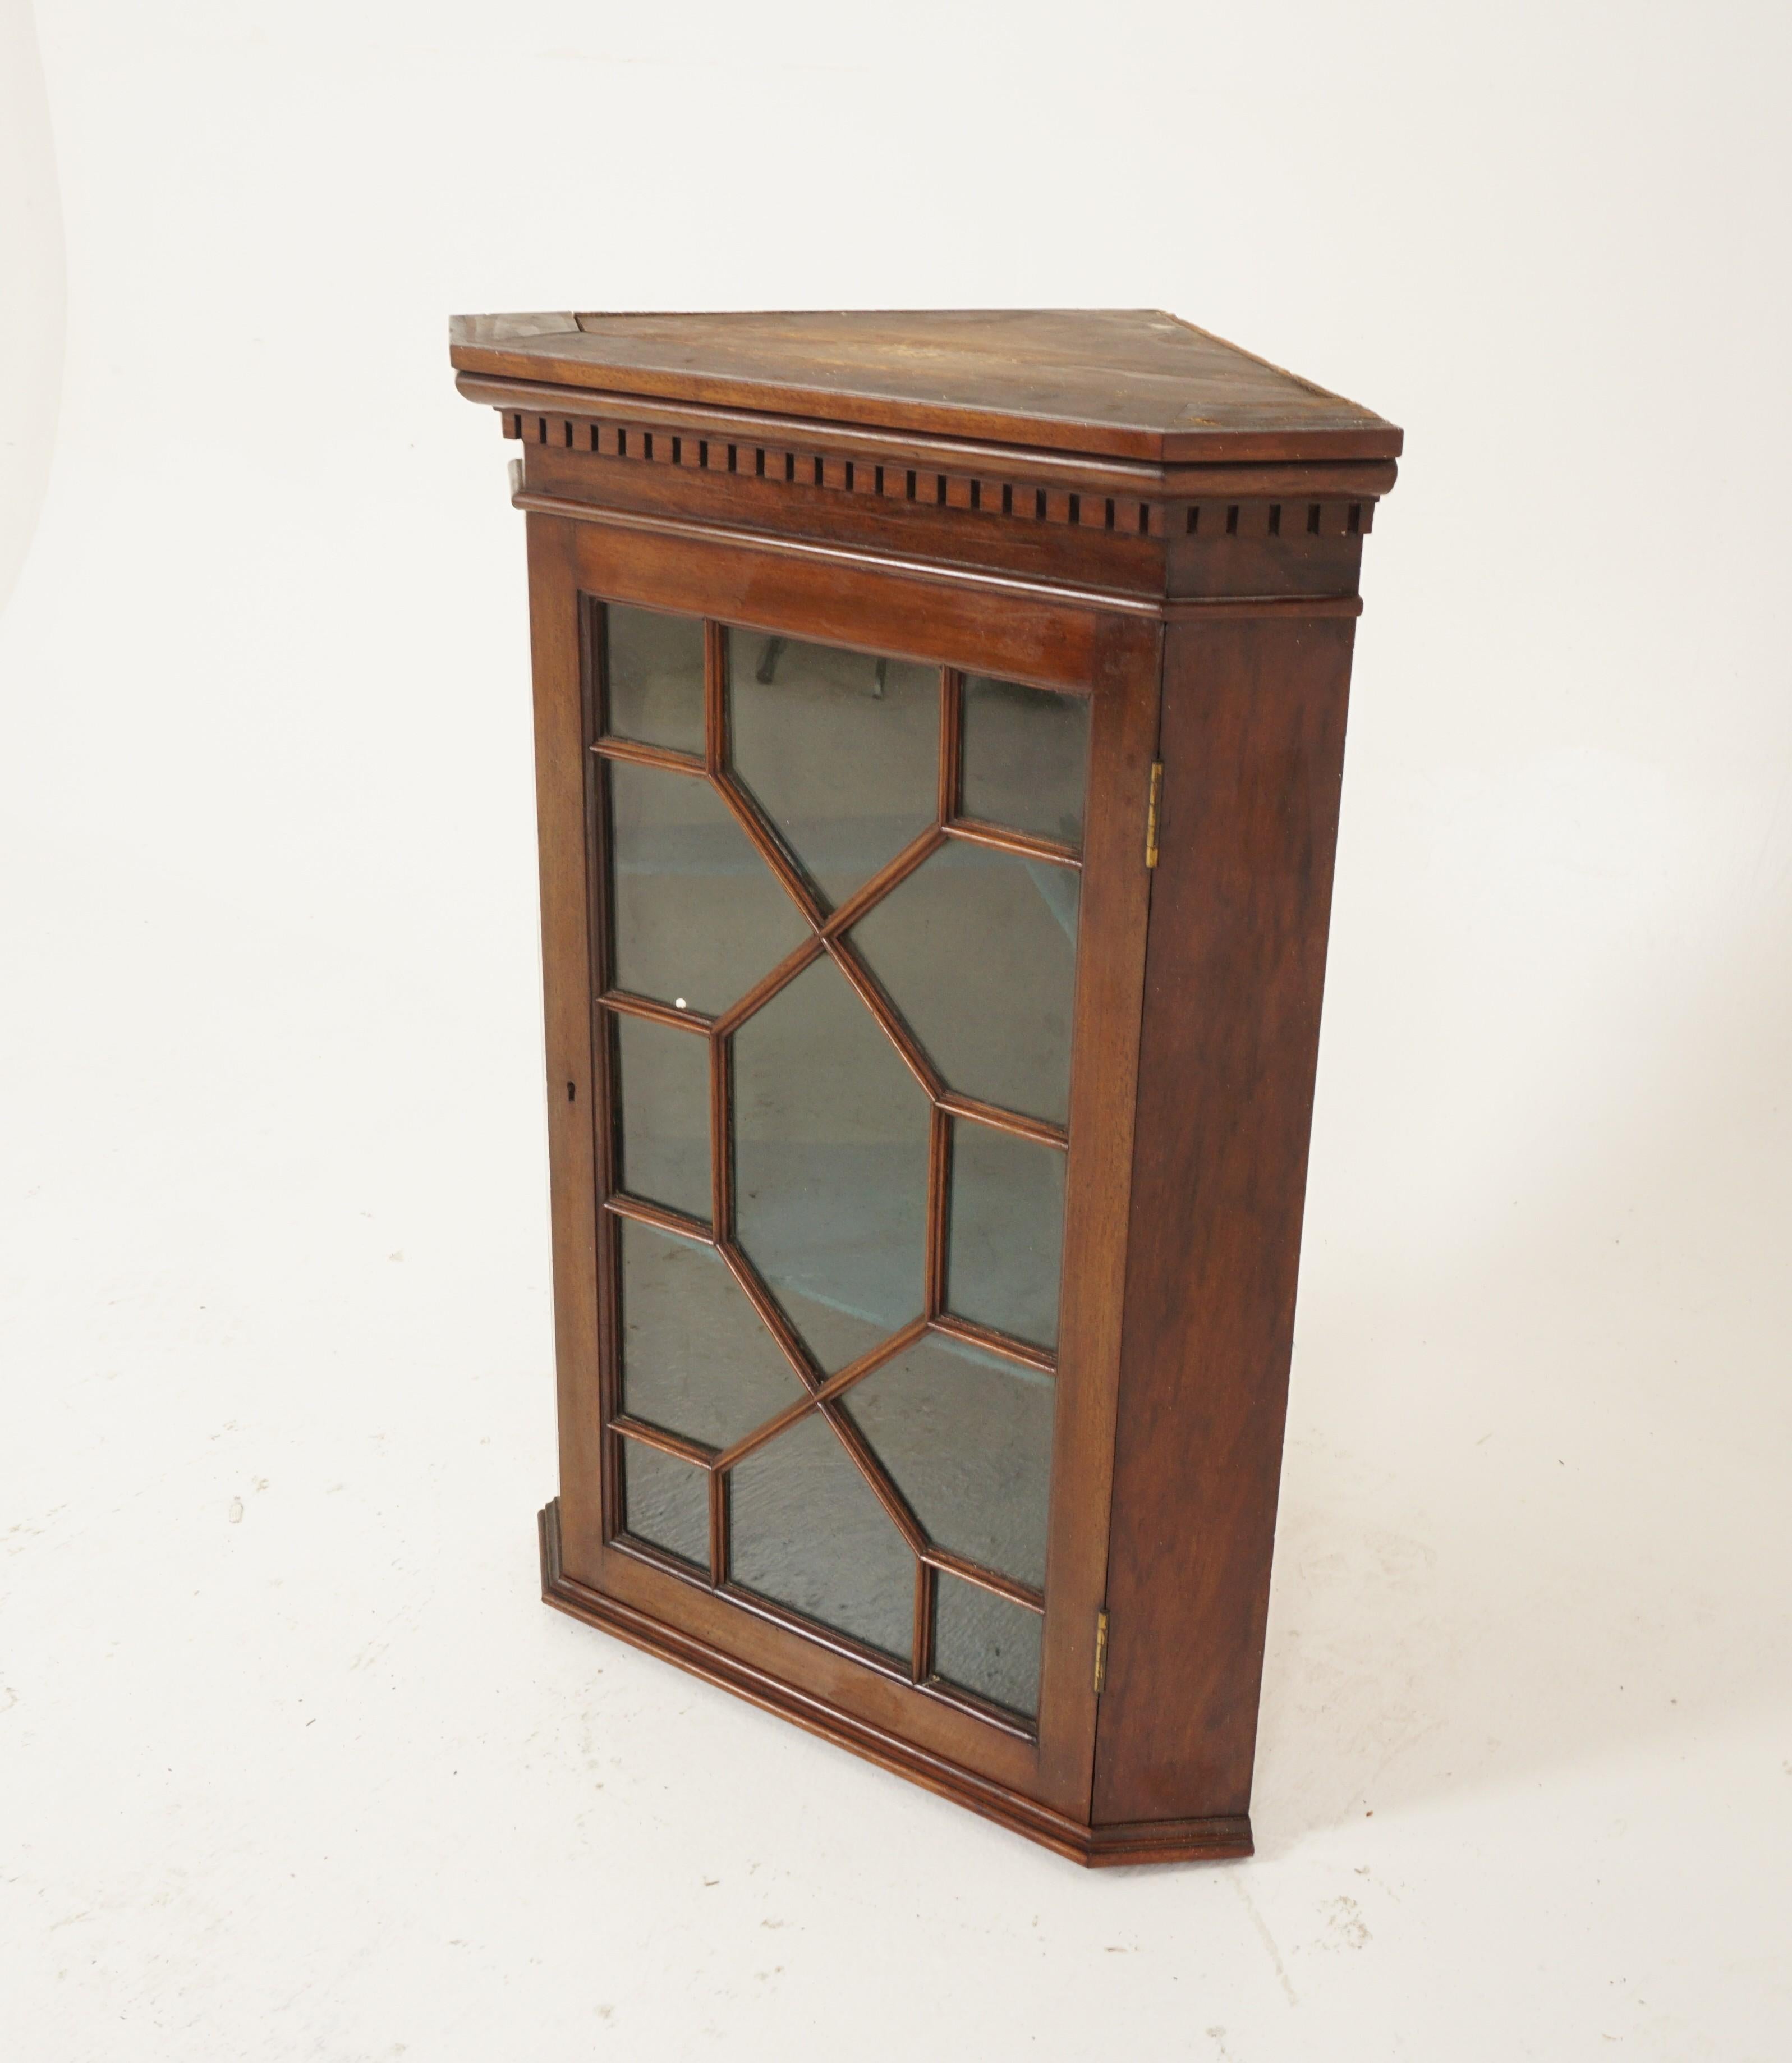 Antique petite walnut hanging corner display cabinet, Scotland 1890, B2654

Scotland 1890
Solid walnut
Original finish
Dentil cornice on top
Featuring 13 pane original glass door which opens to reveal 2 lined shelves
With original lock but no